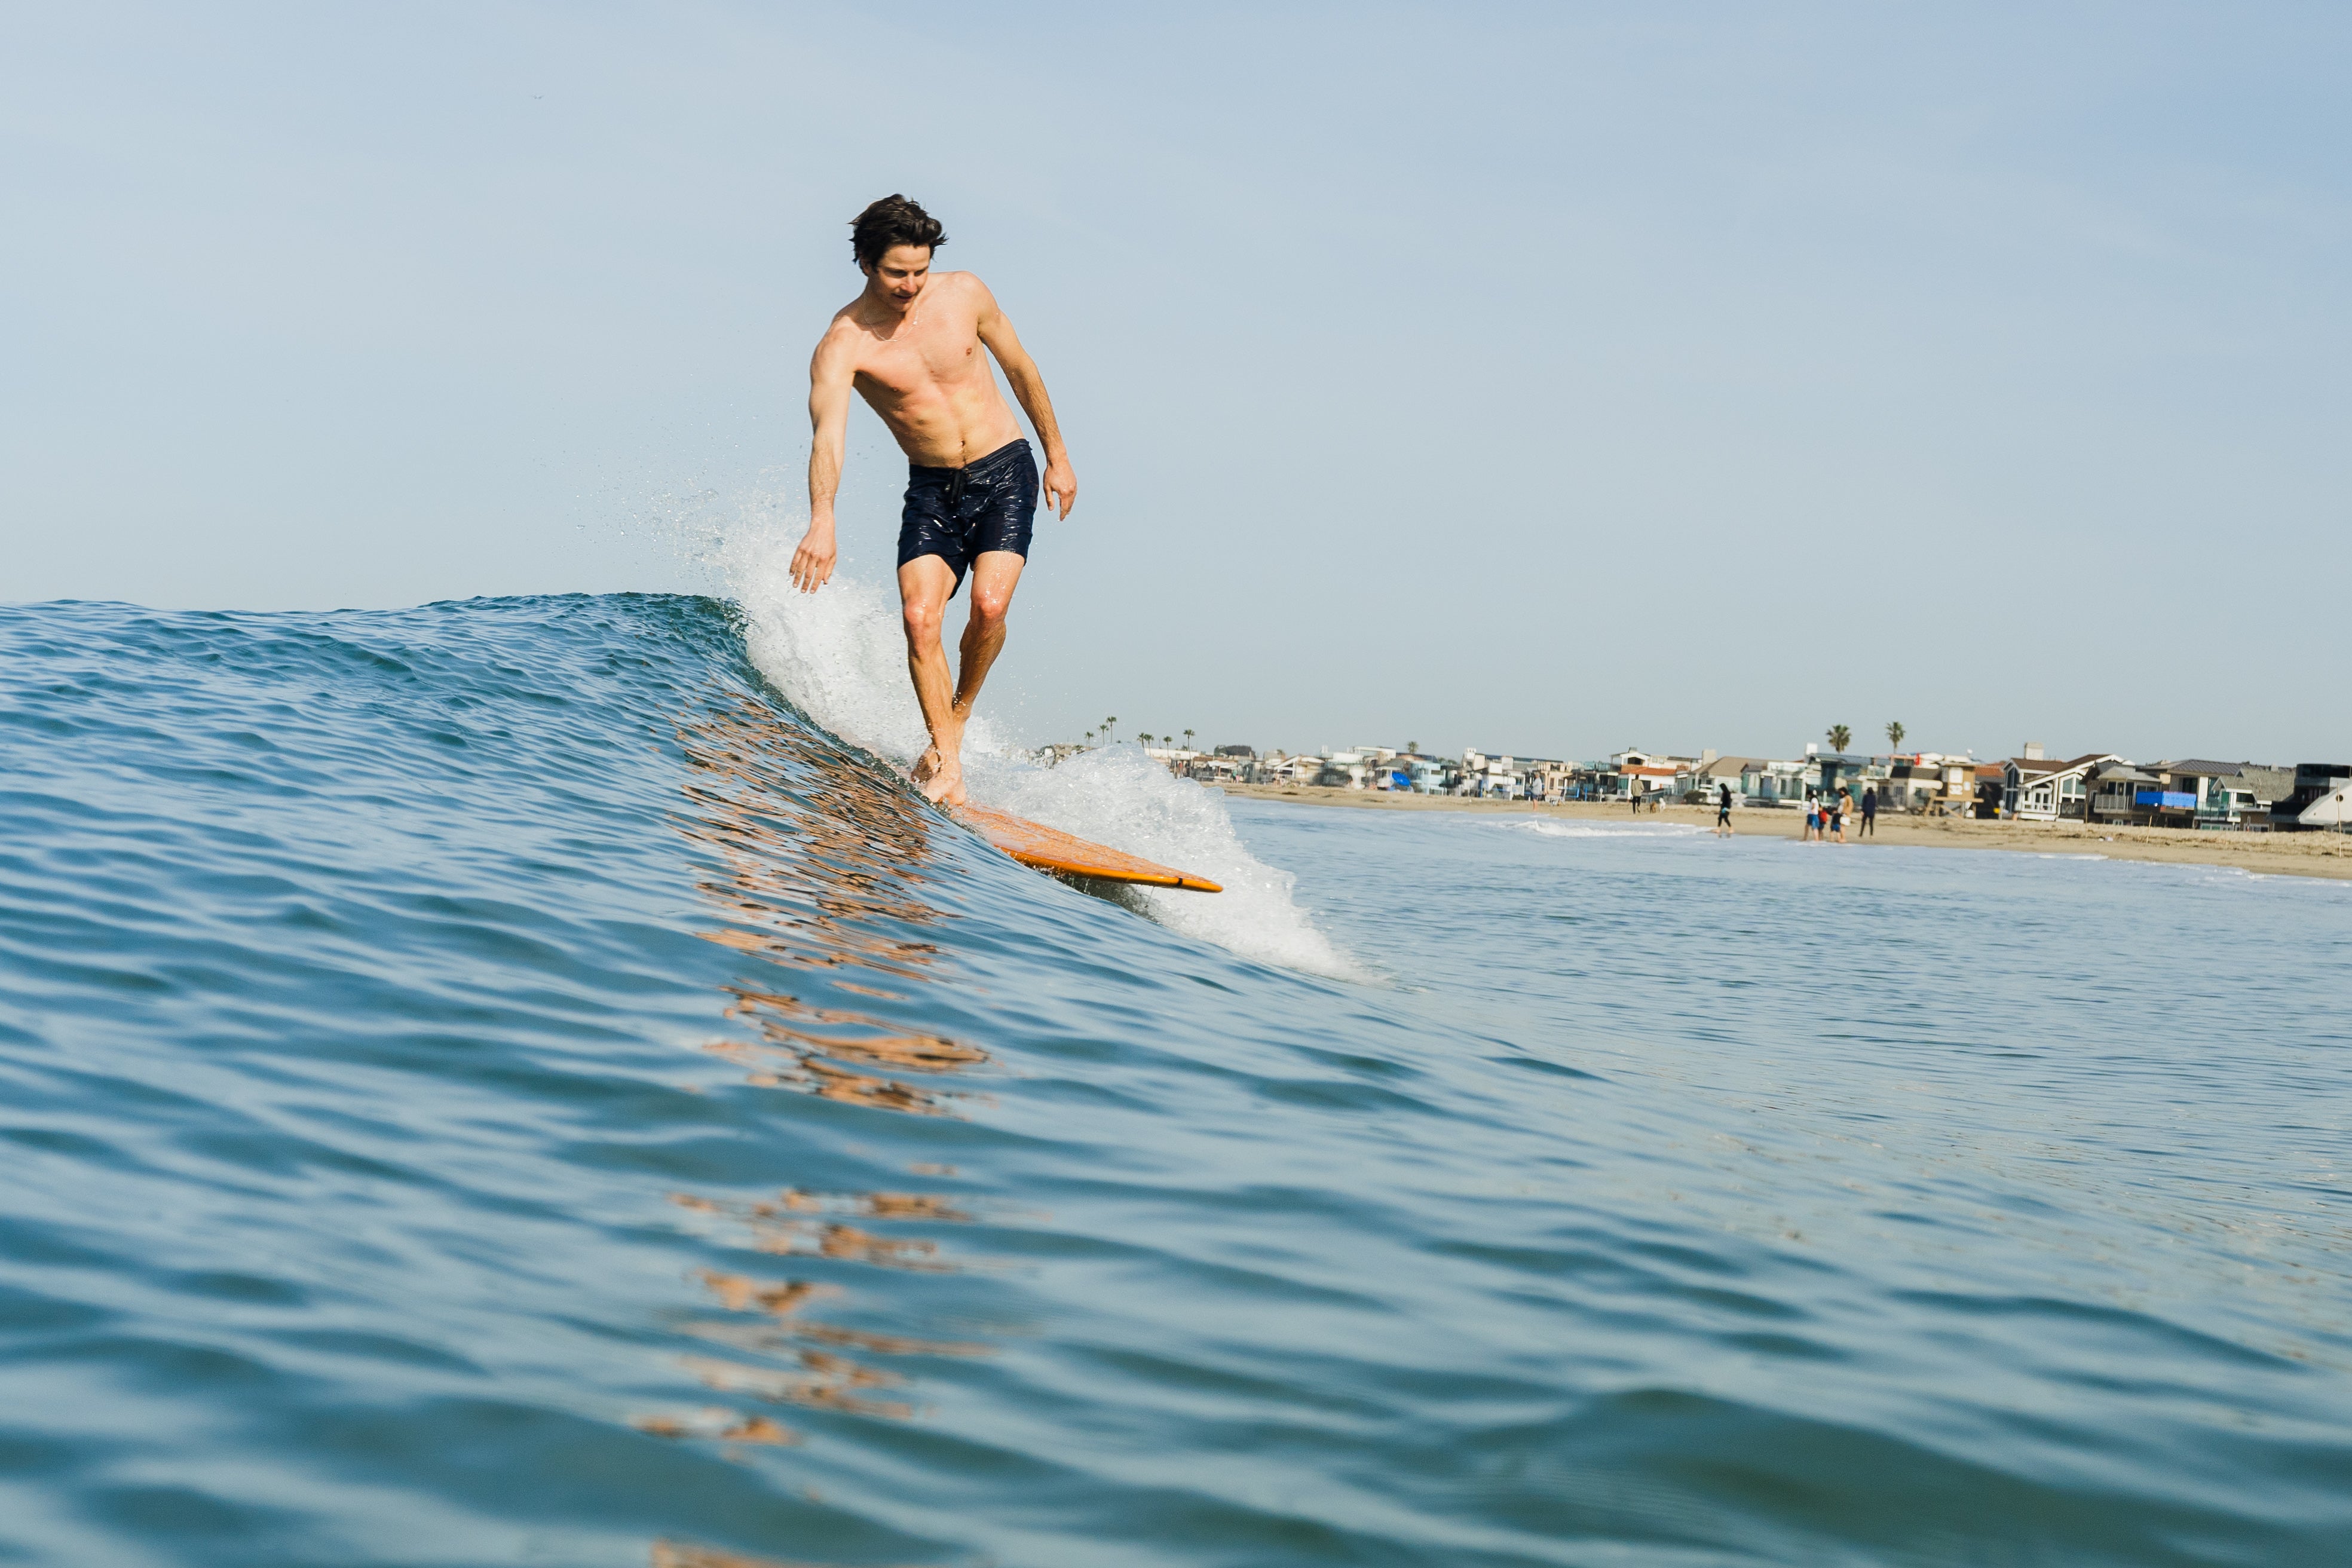 How Do You Find More Time to Surf?